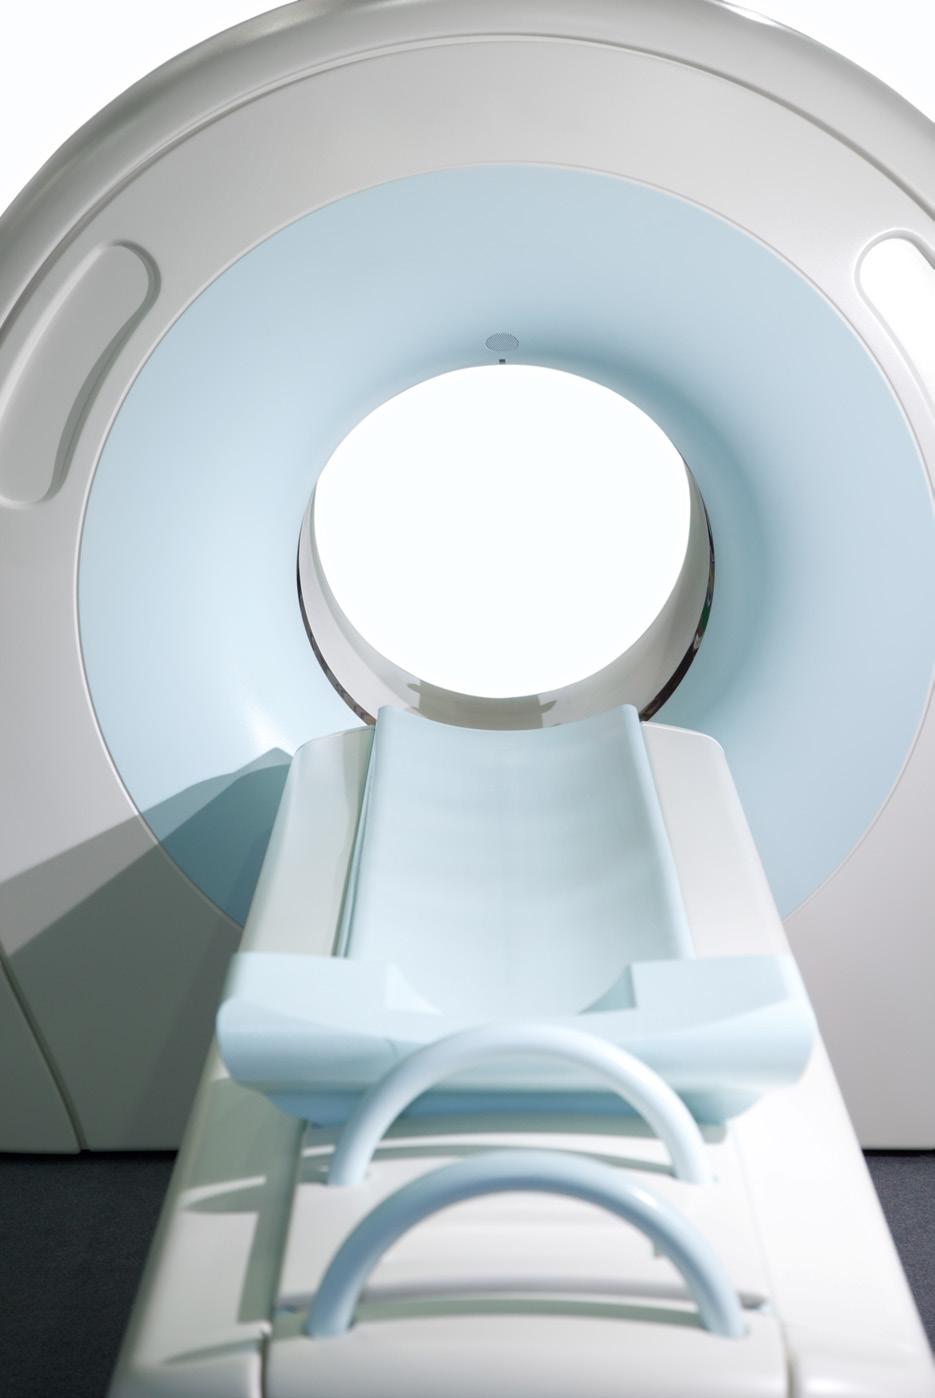 IOWA RADIOLOGY 5 What are the risks of CT scanning?